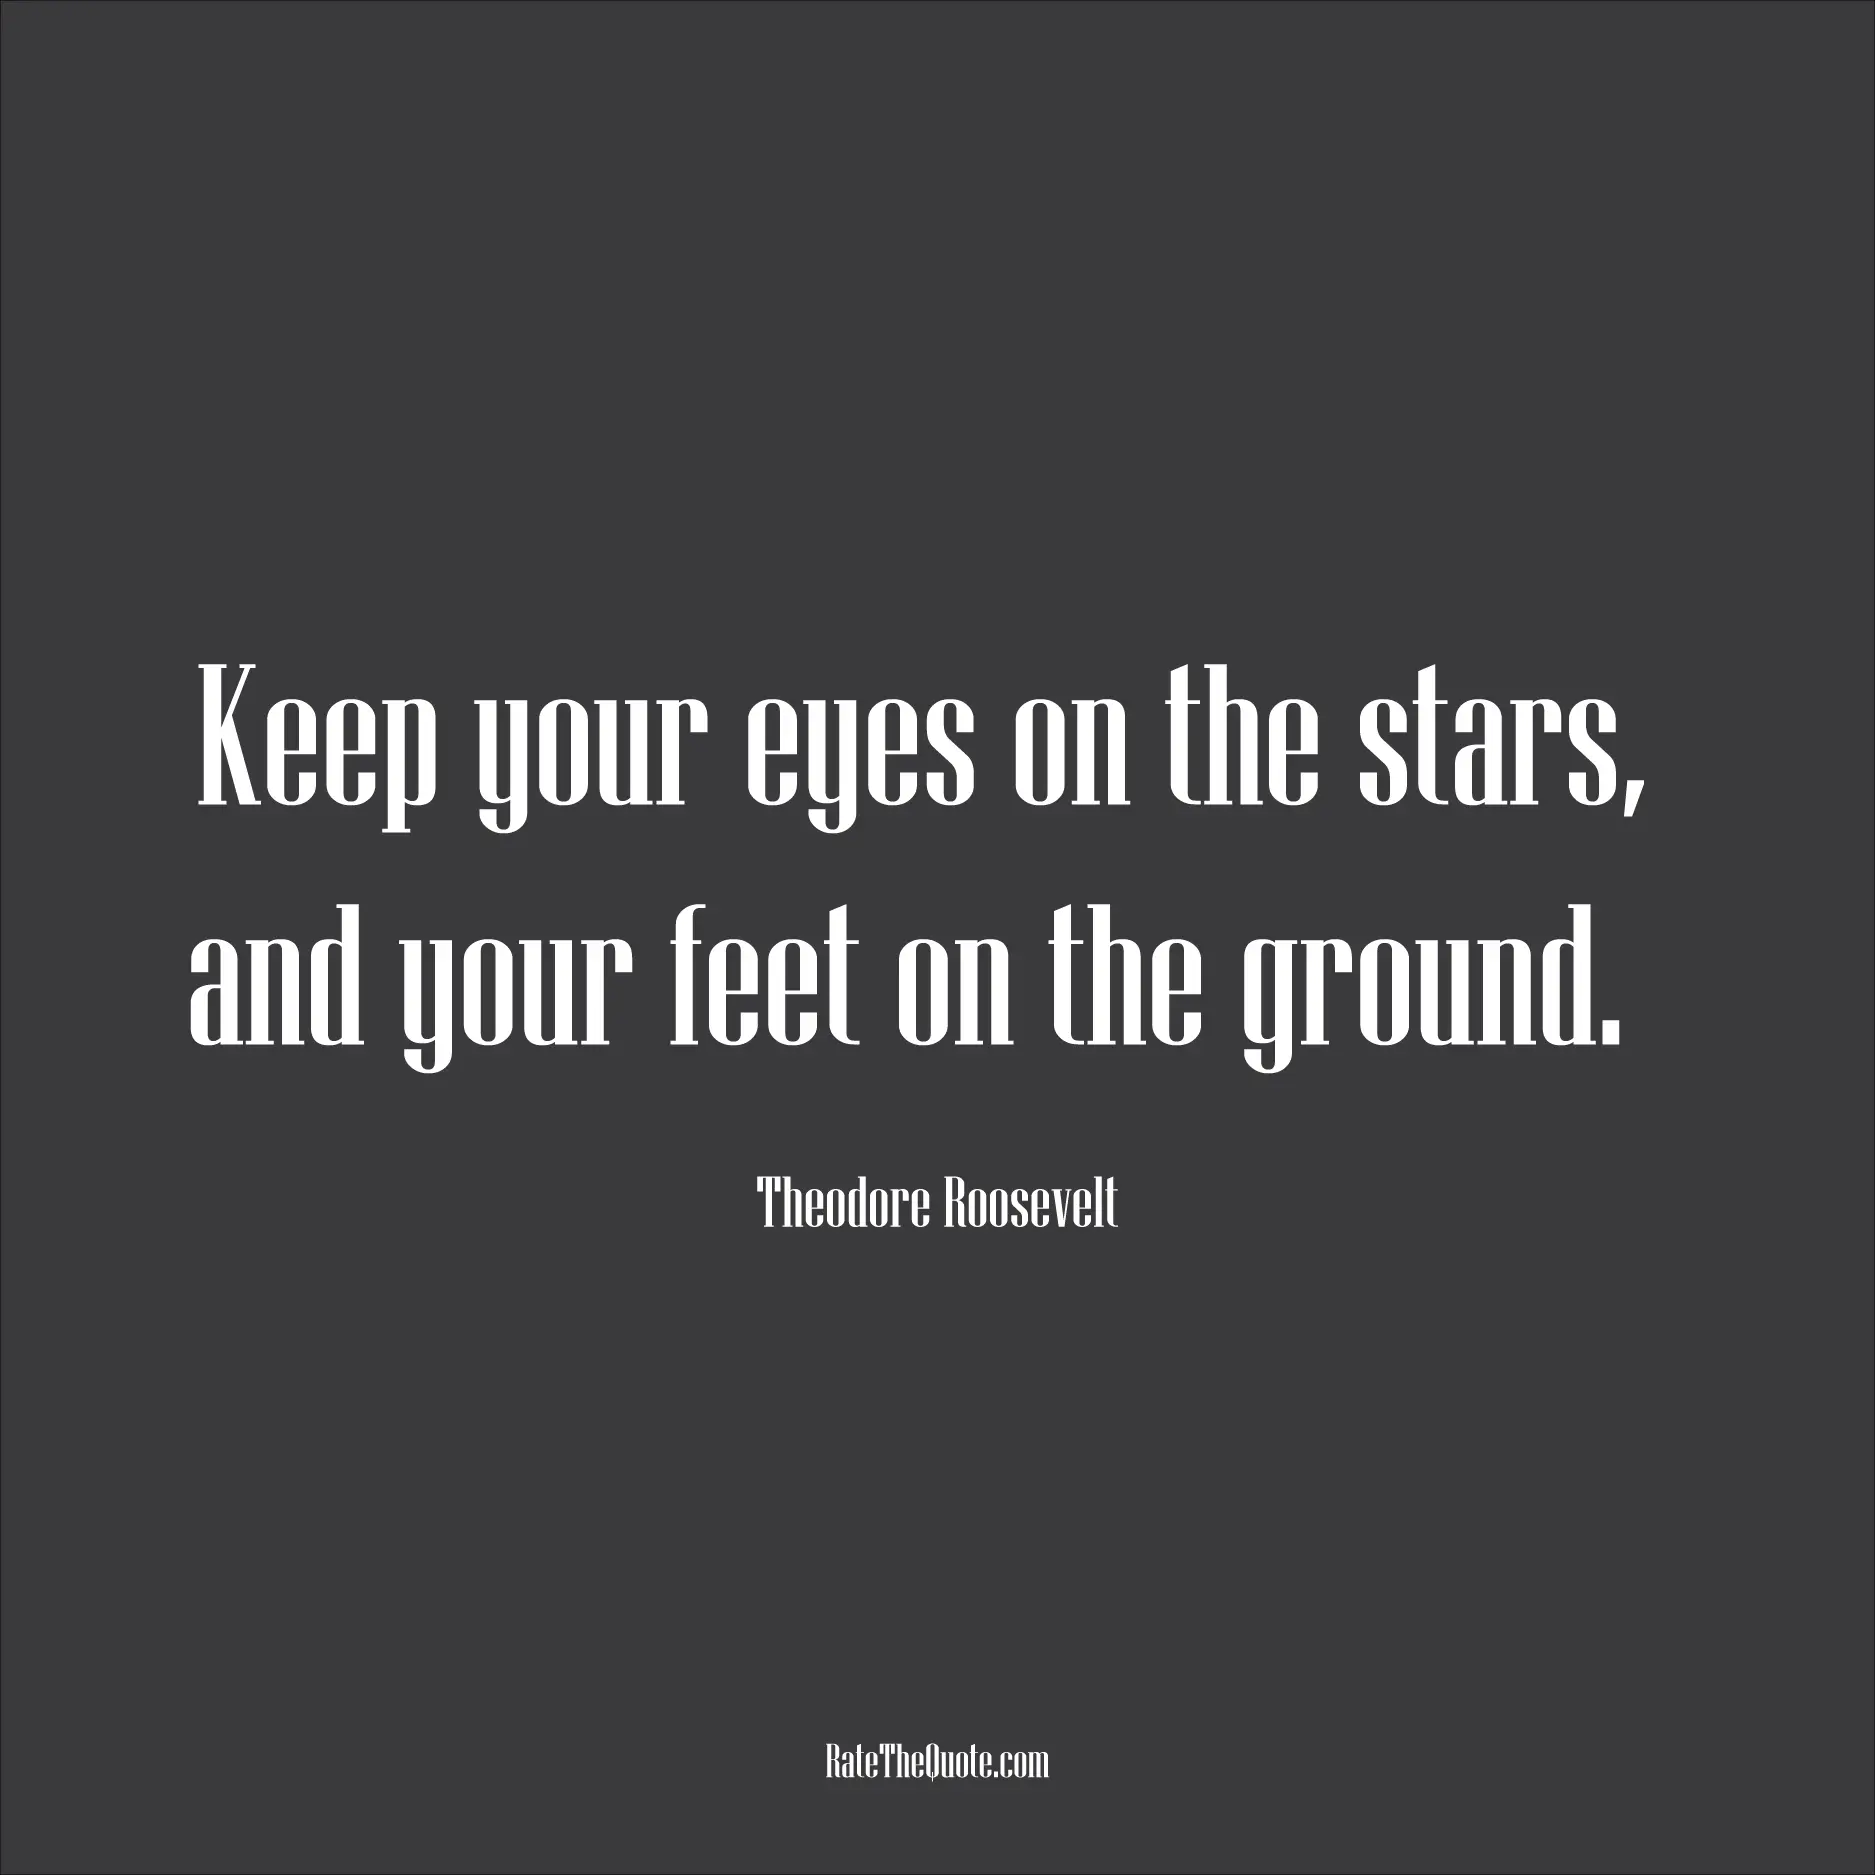 Motivational Quotes Keep your eyes on the stars, and your feet on the ground. Theodore Roosevelt